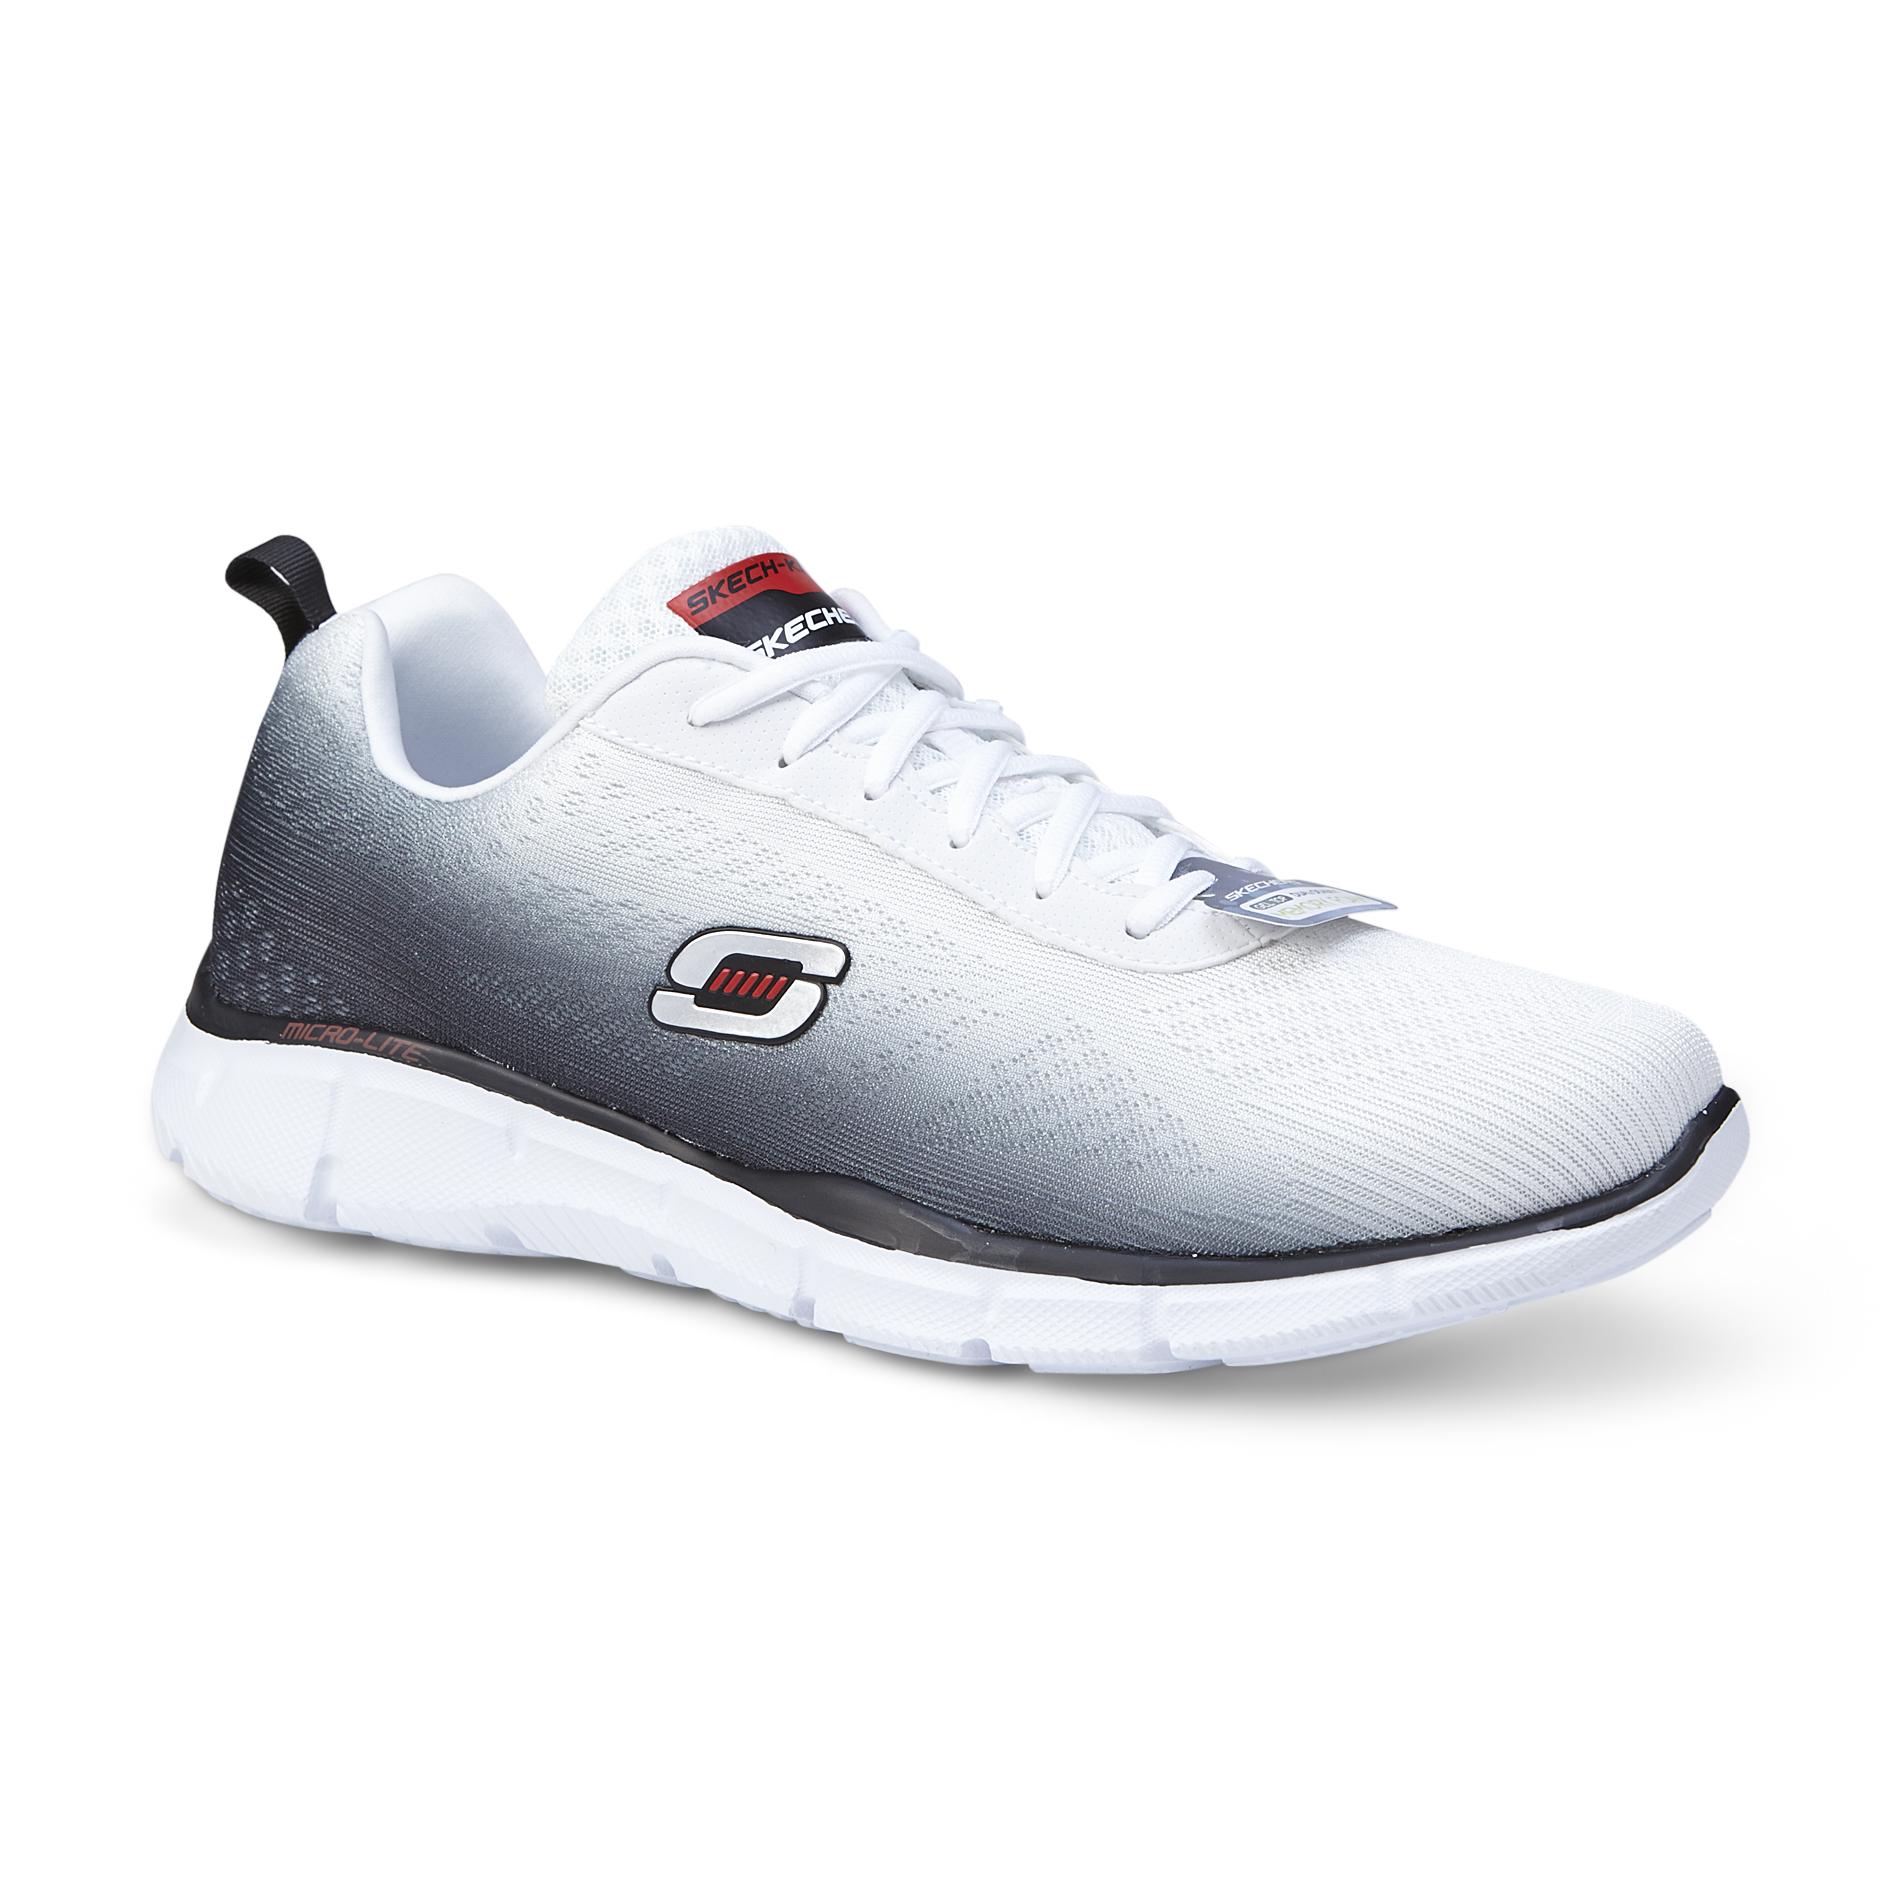 UPC 888222268619 - Skechers Men's Equalizer This Way Oxford, White ...